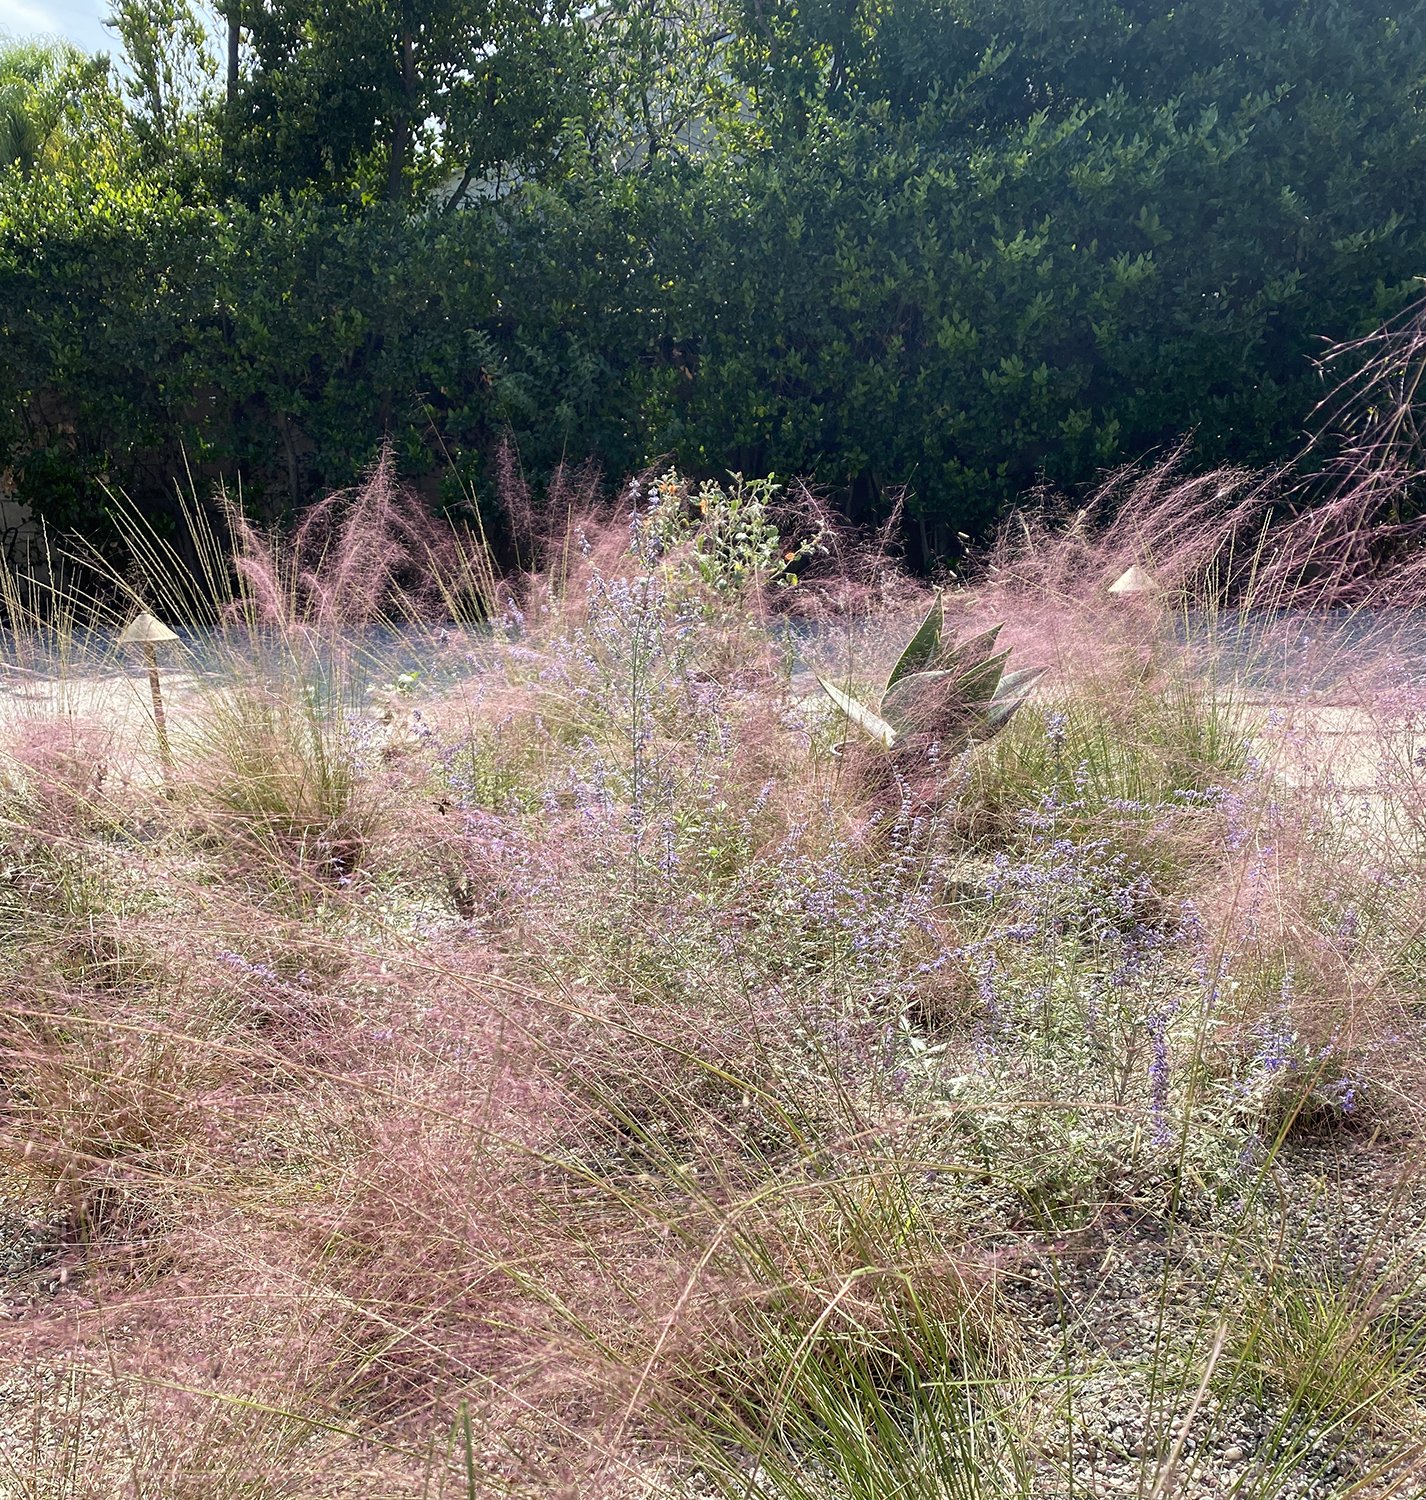  Pink muhly starring in a native and drought-tolerant meadow - the colors will shift through the seasons as each plant blooms in turn 